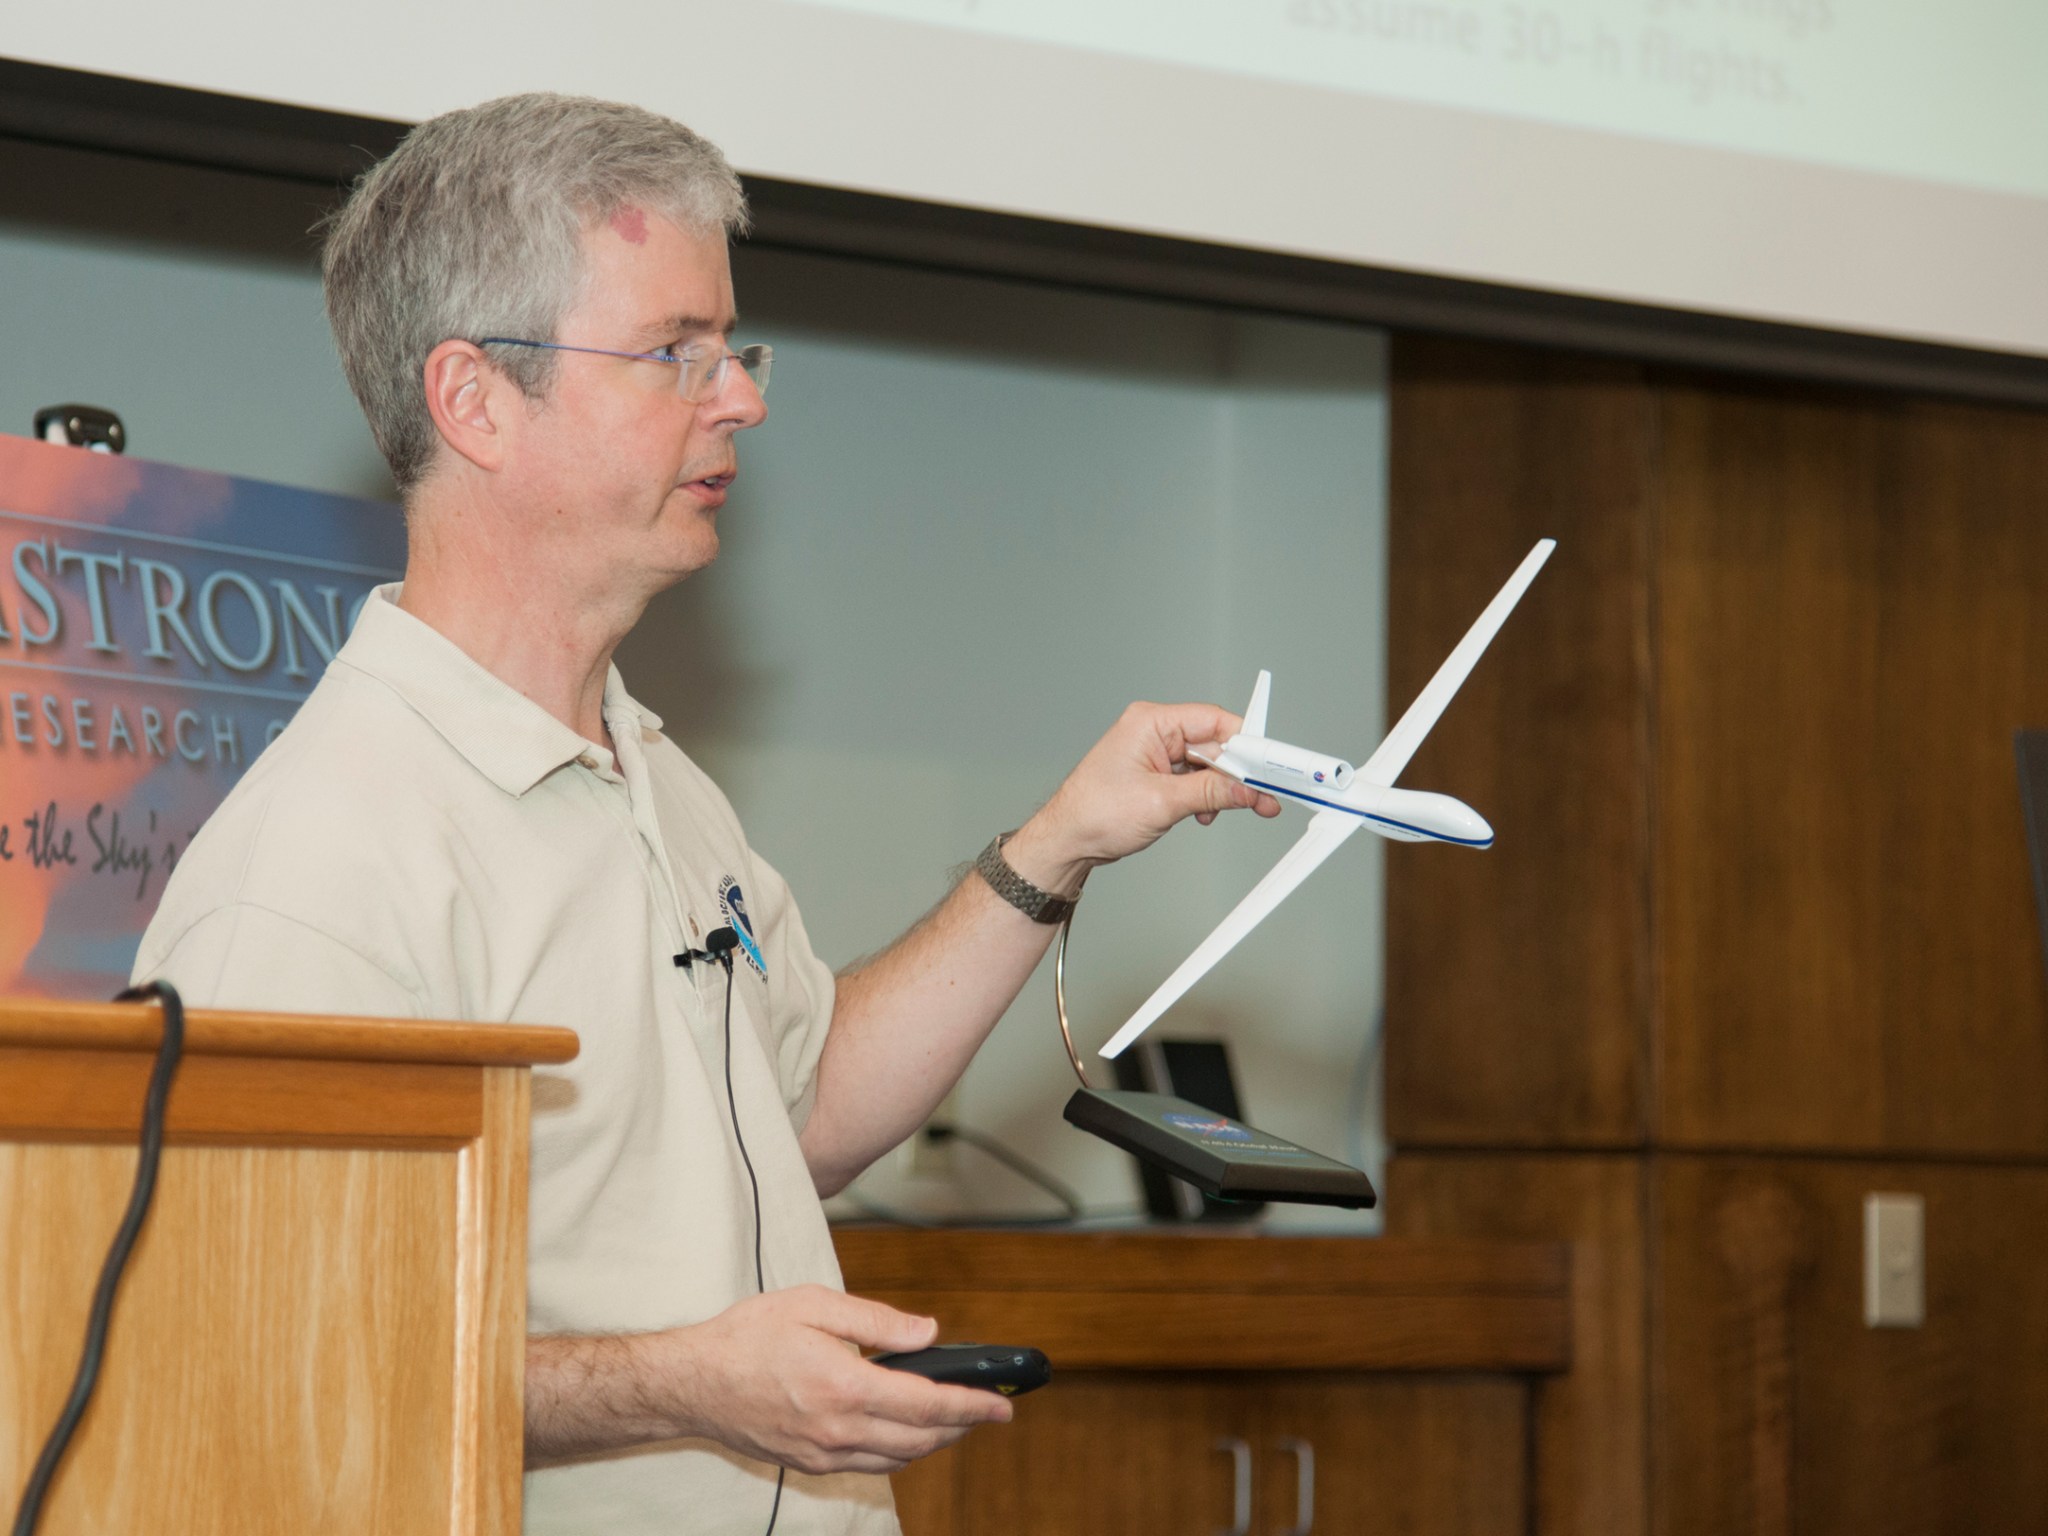 Gary Wick, NOAA's physicist and manager for Unmanned Air Systems talked about the partnership with NASA.